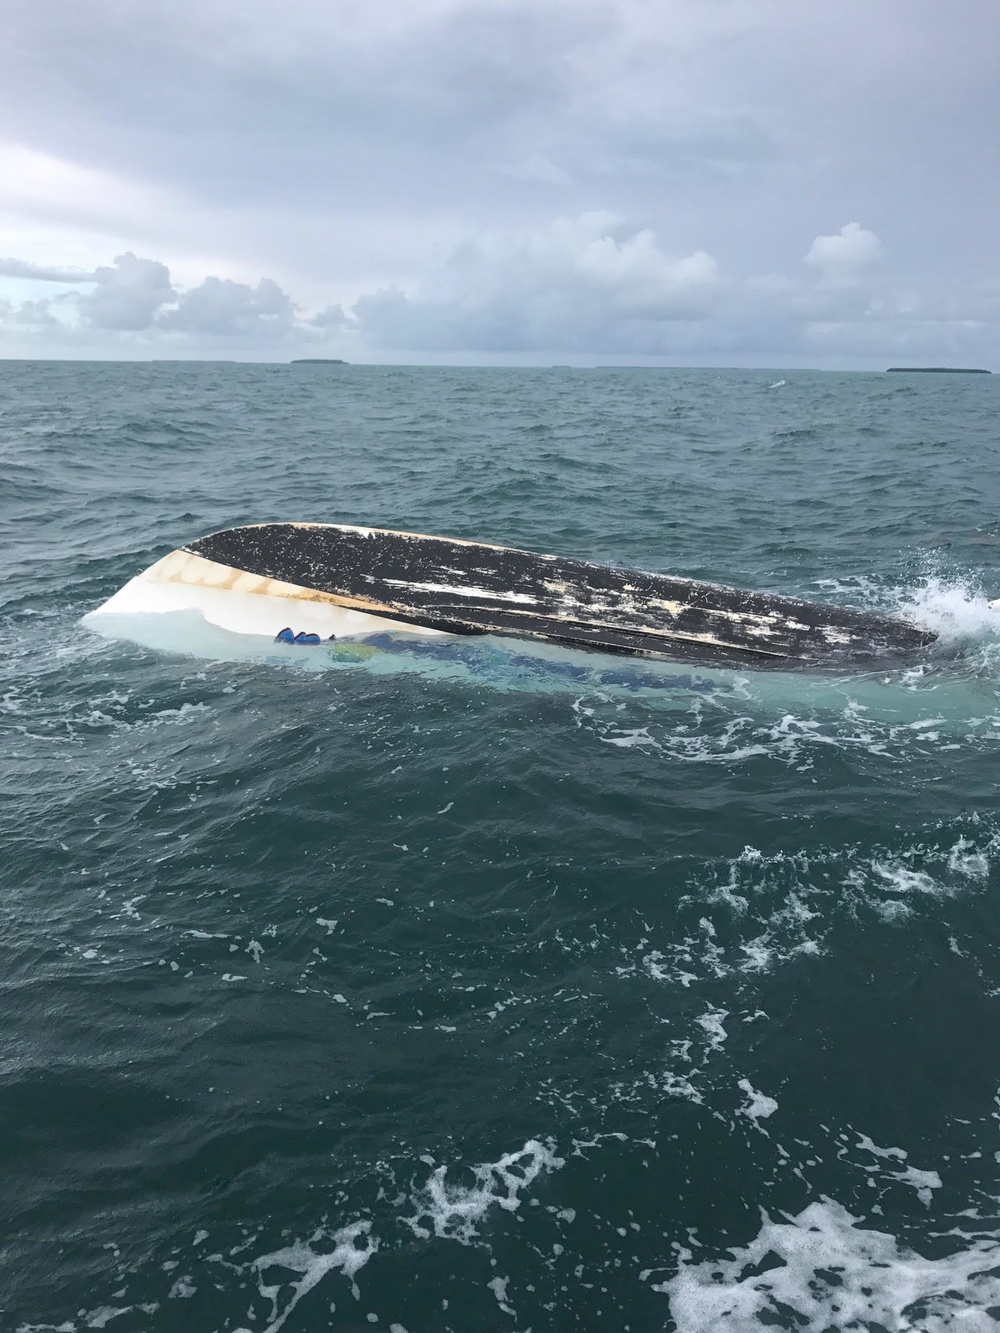 Capsized vessel Coast Guard boat crew rescued six people from